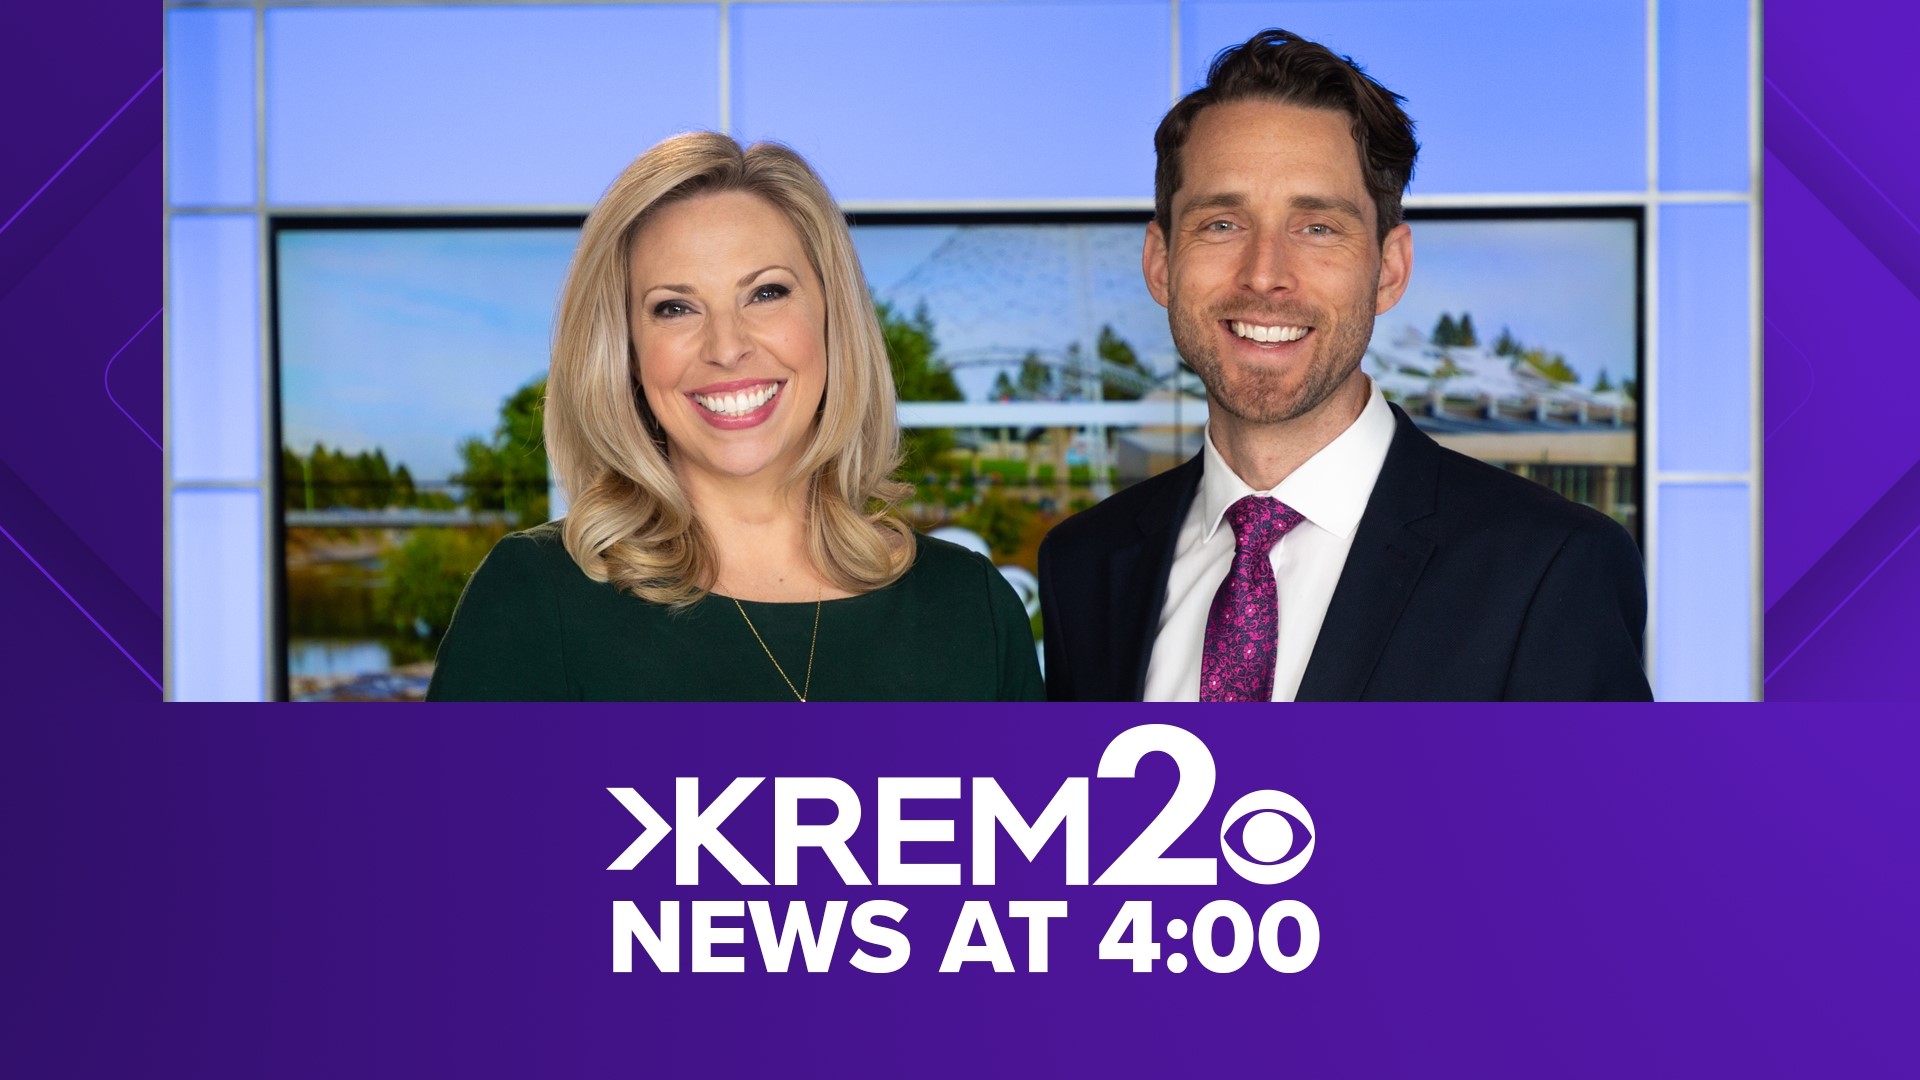 Watch 'KREM 2 News at 4' for an earlier look at the big news stories in eastern Washington and north Idaho, along with an updated forecast for the evening commute.